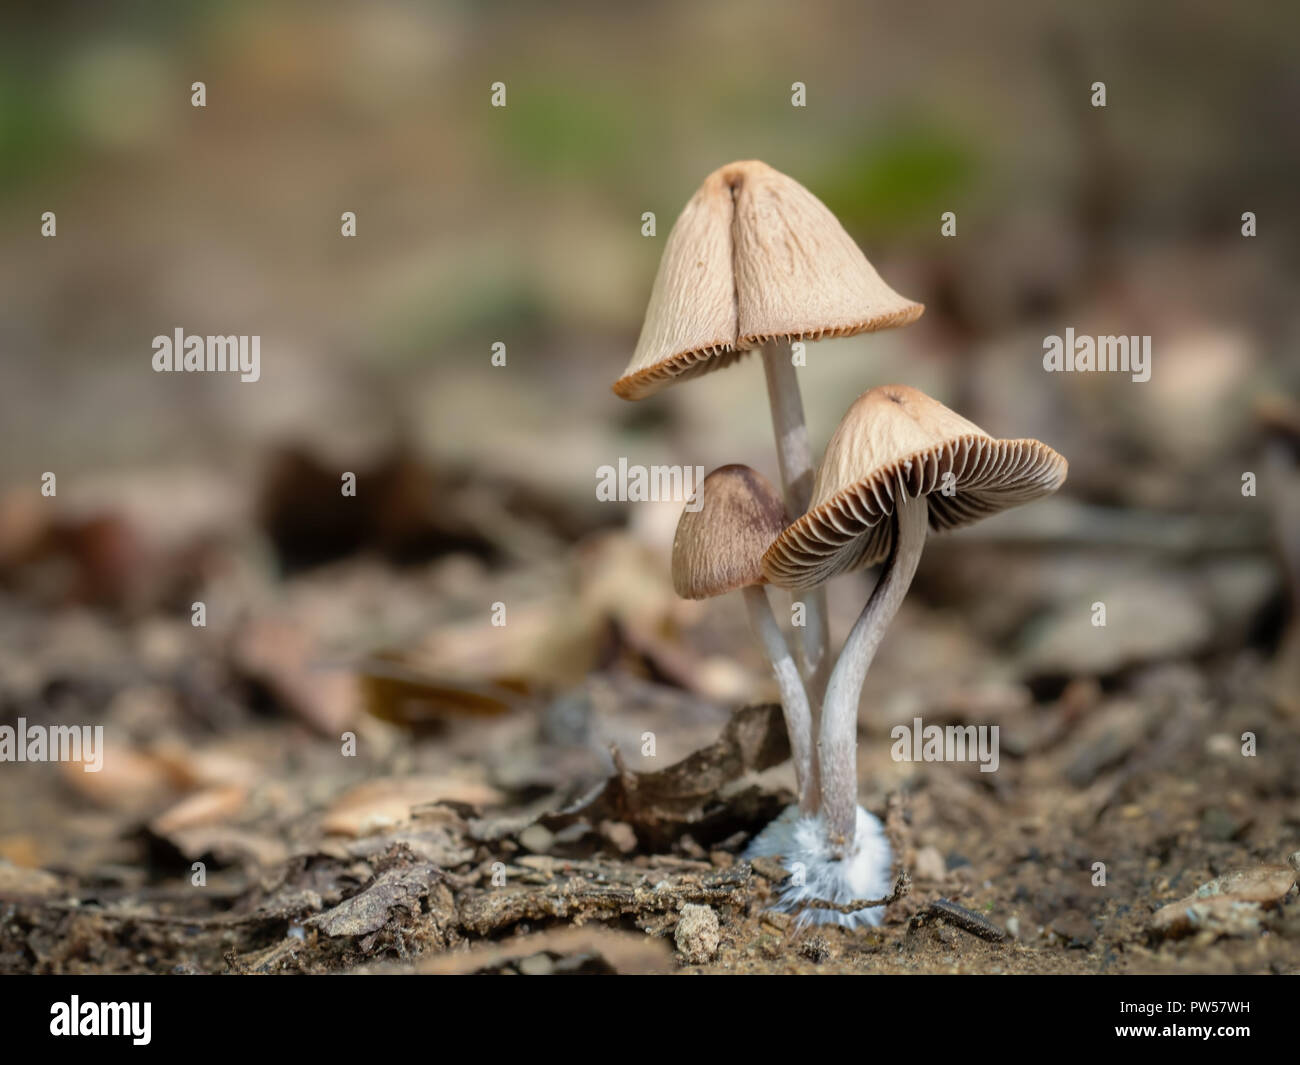 Cute toadstool family group with copyspace. Nature macro. Stock Photo